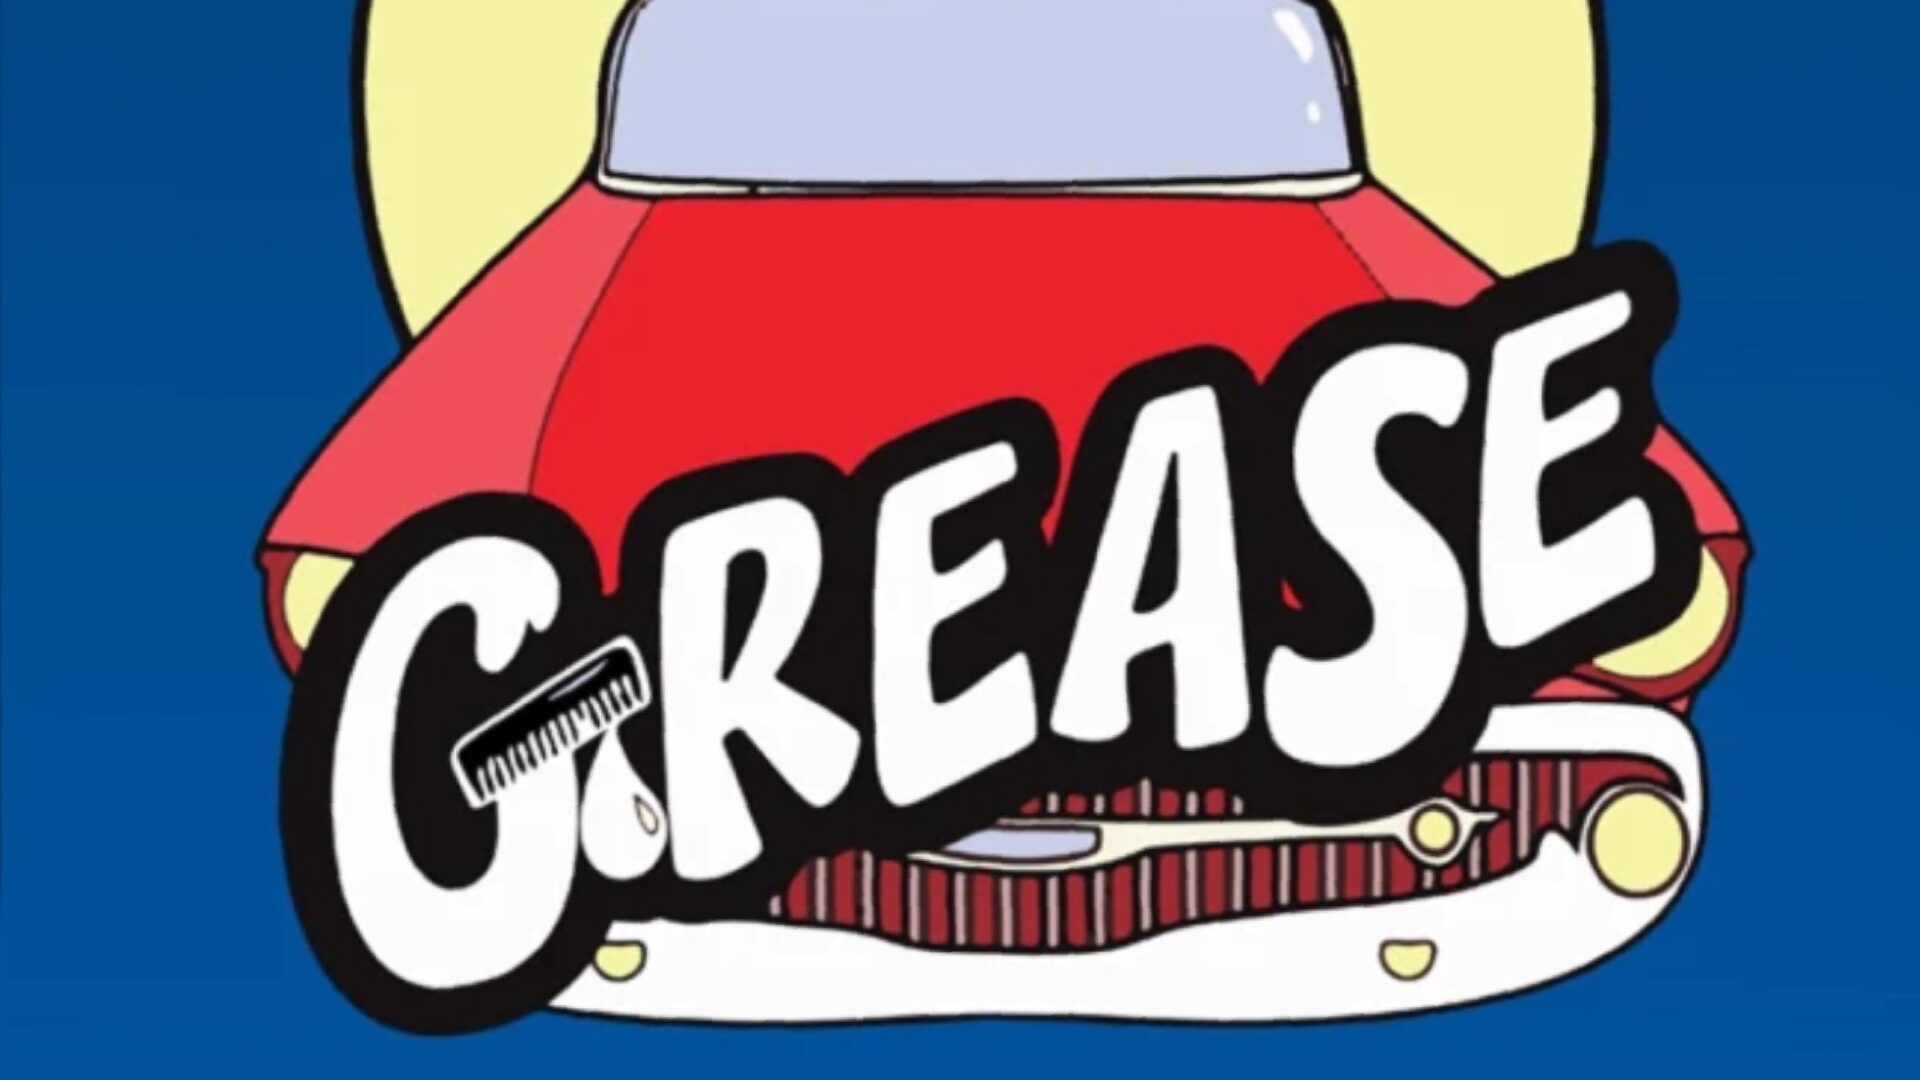 “Grease”